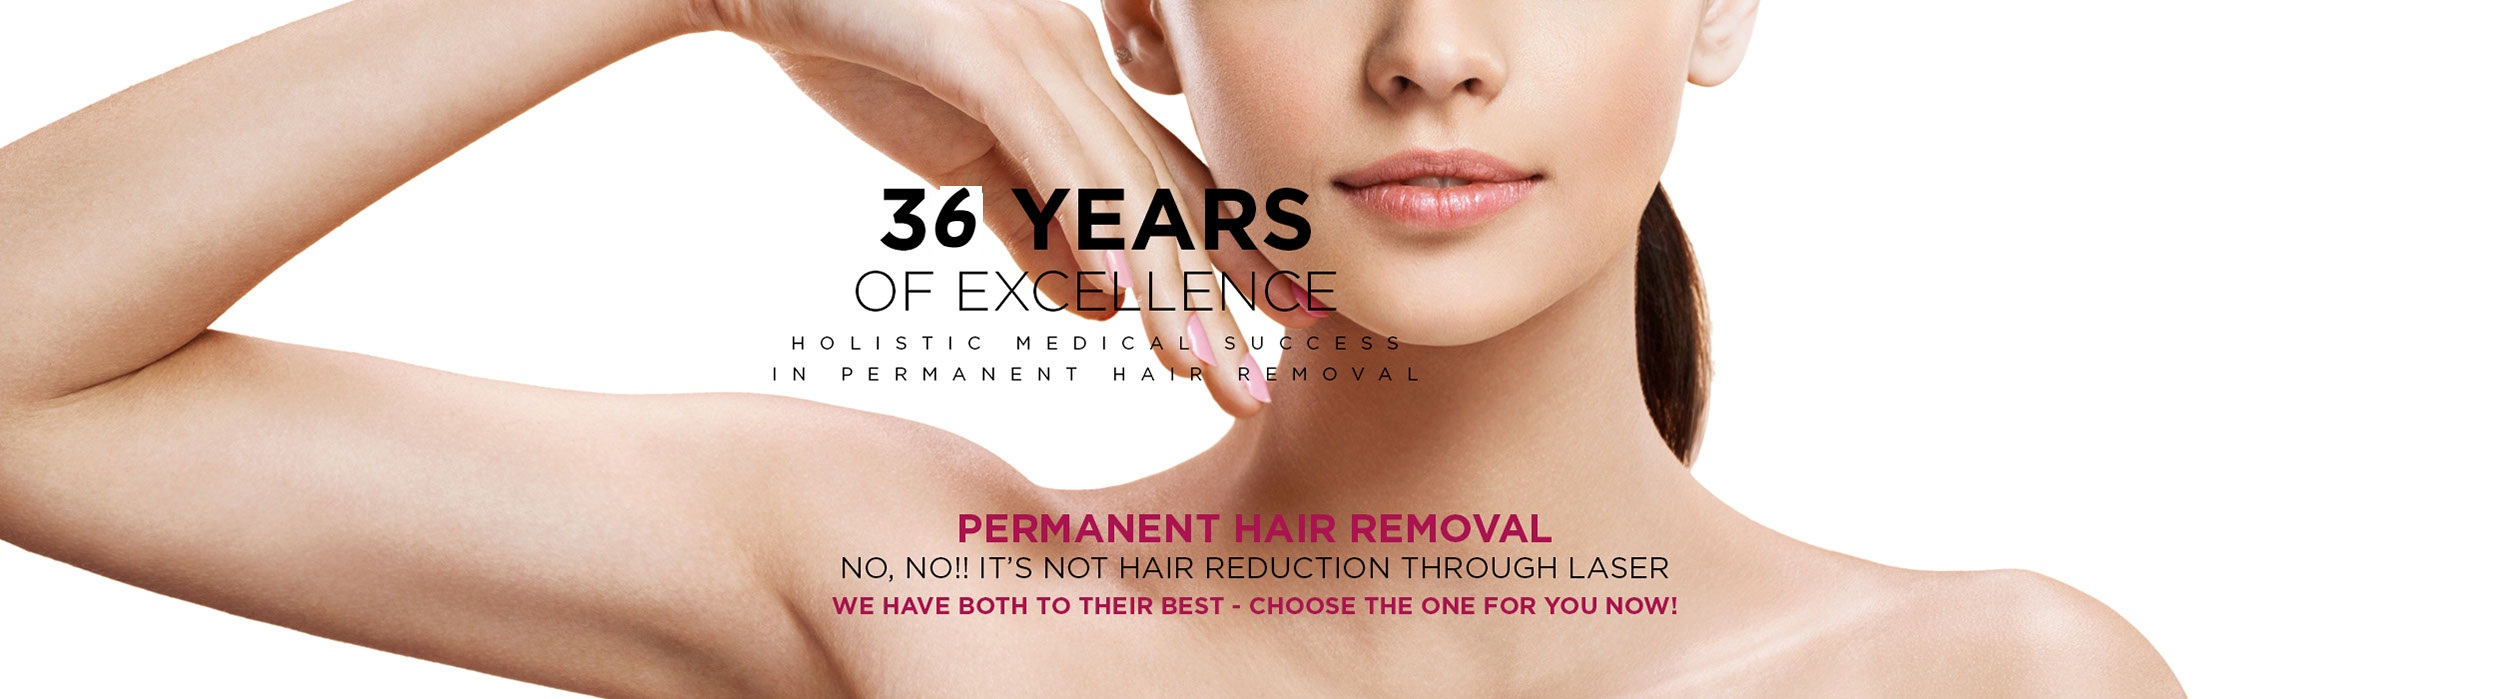 What is the cost of electrolysis hair removal?